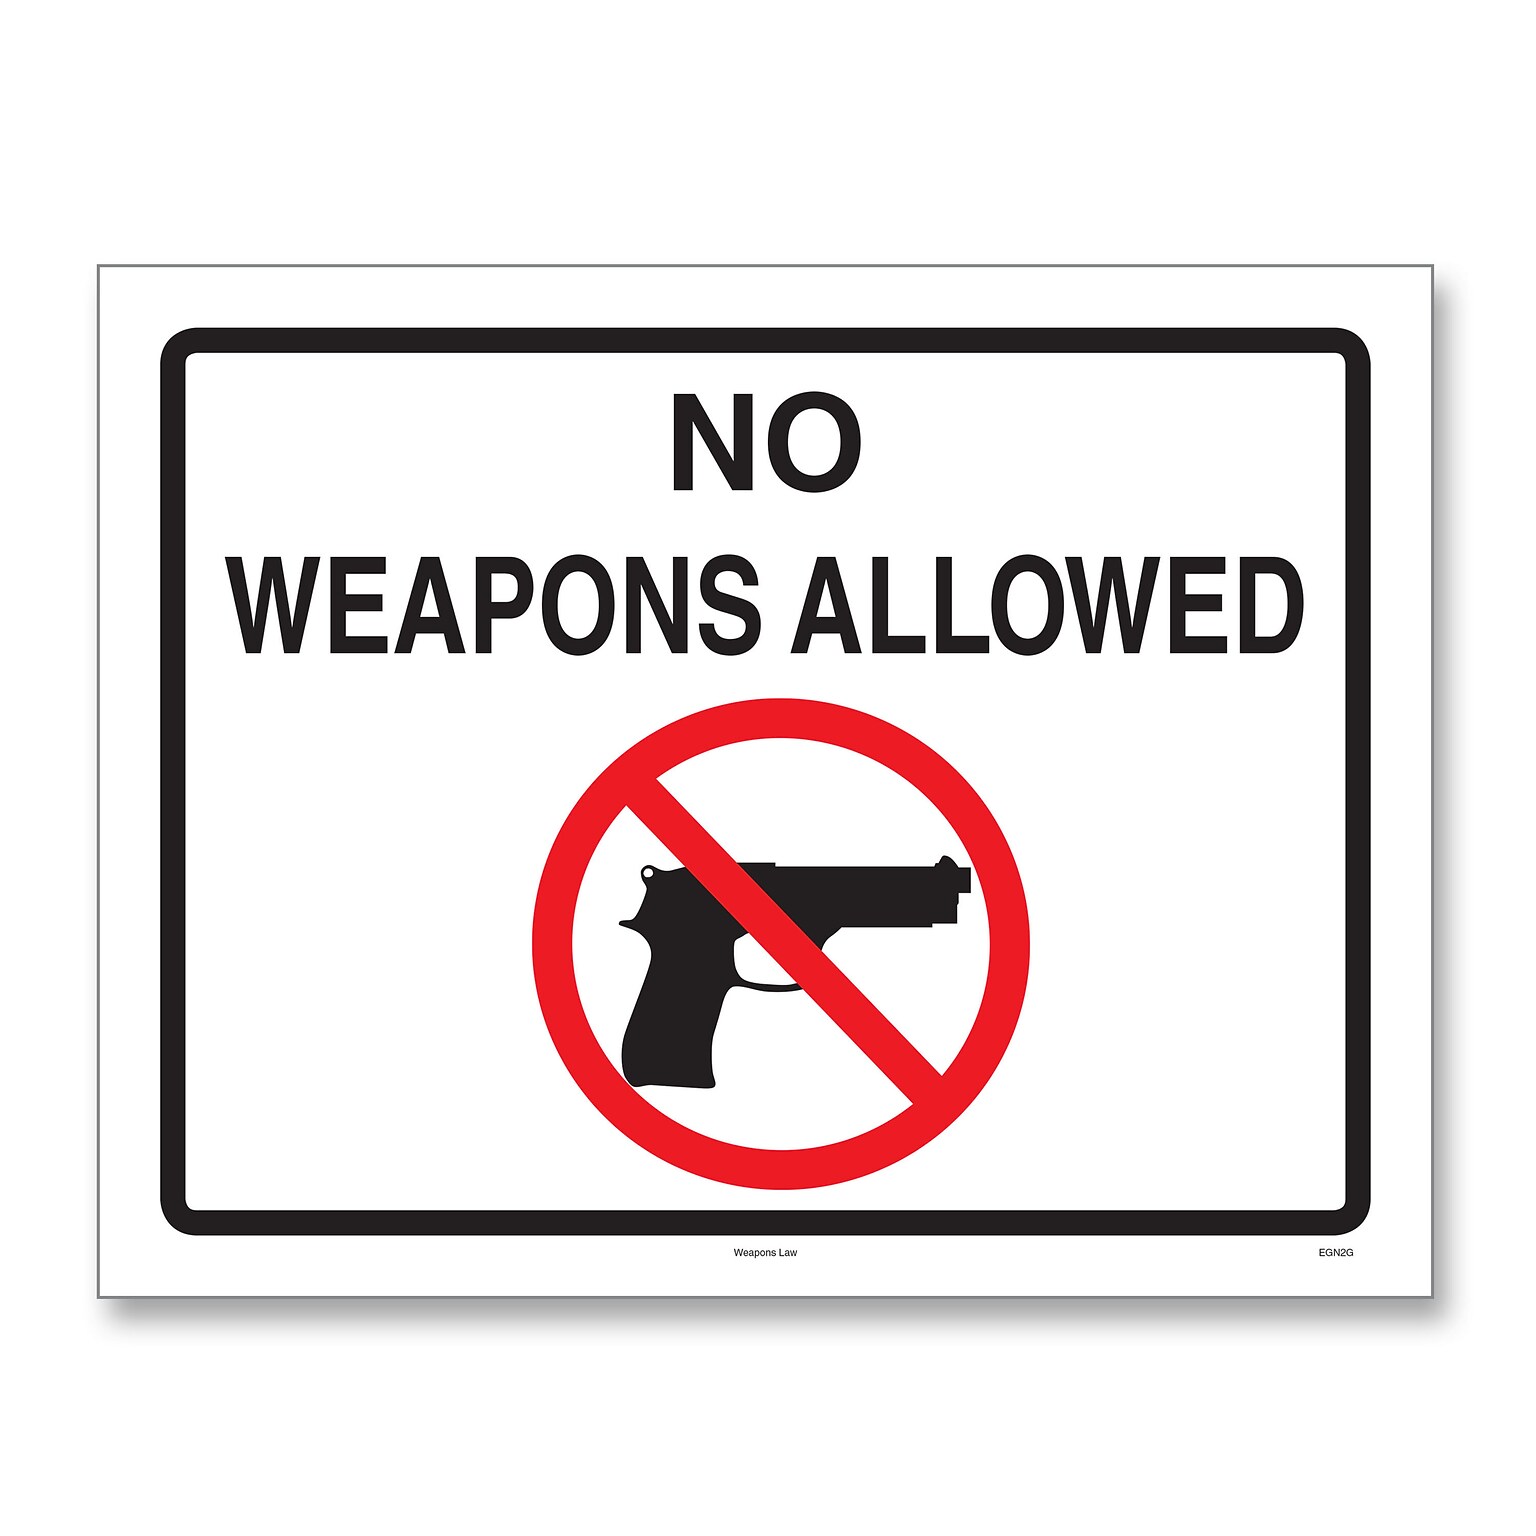 ComplyRight™ Weapons Law Posters, Delaware, 11 x 8.5 (E8077DE)